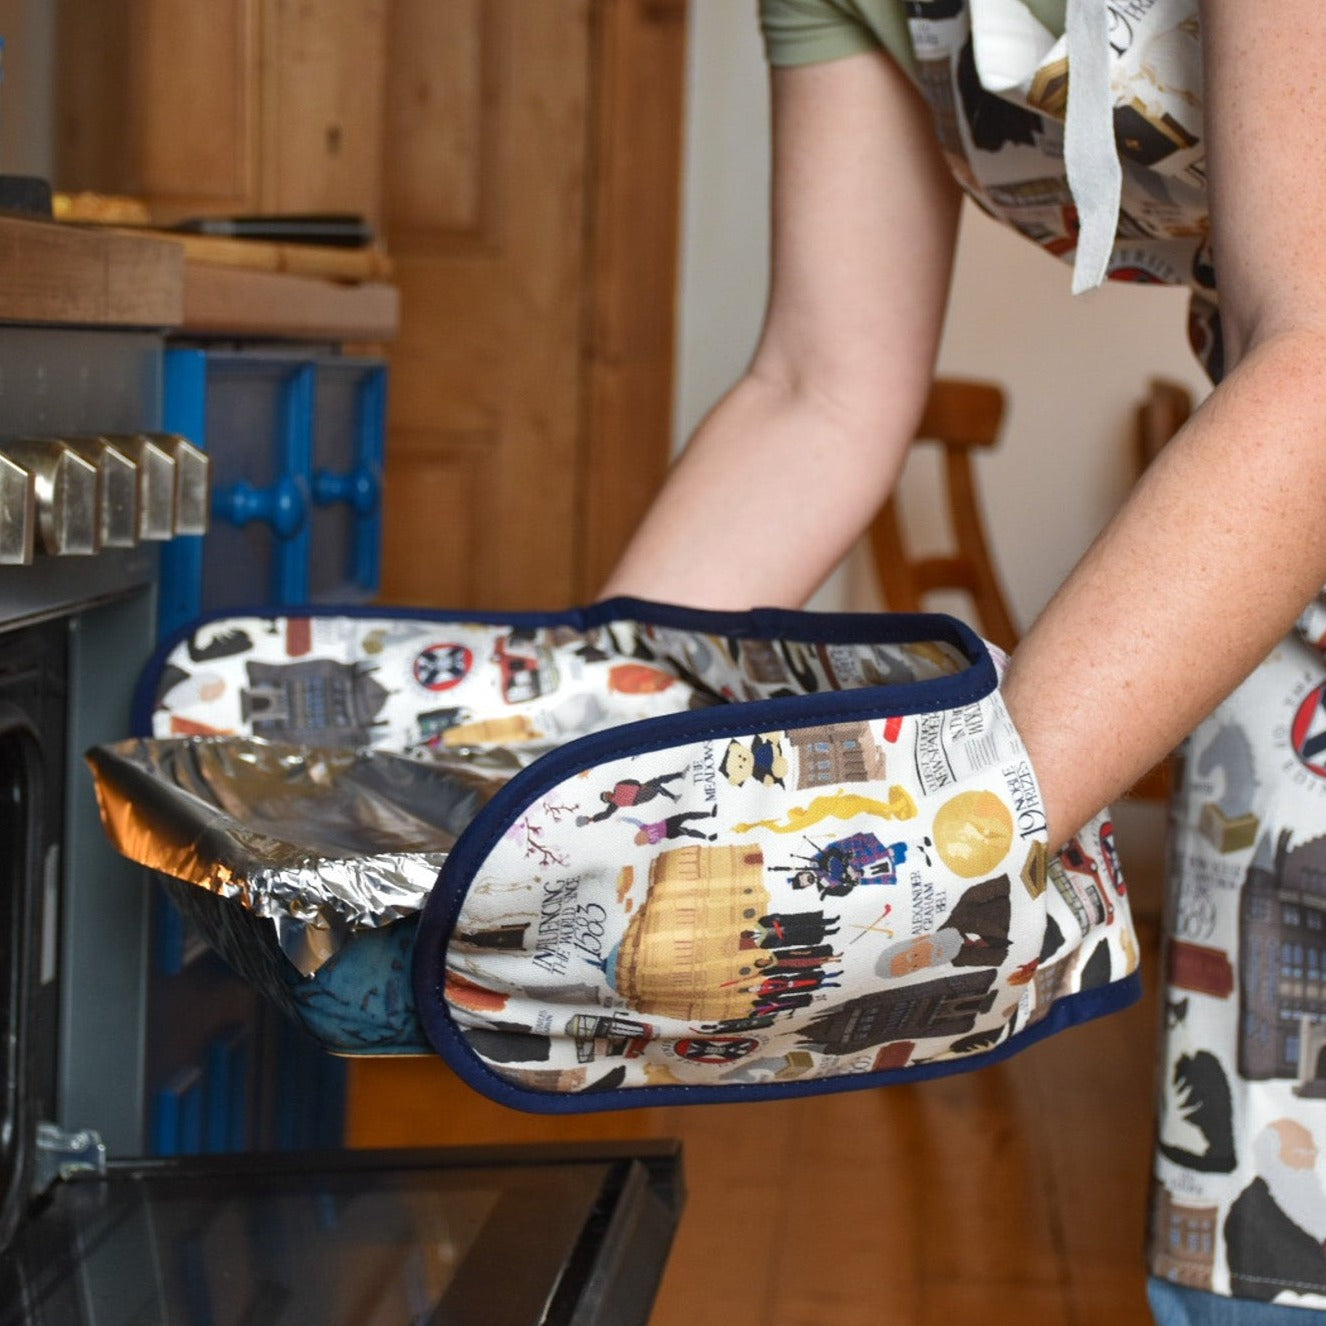 Model uses oven gloves with illustrations of various University of Edinburgh icons, buildings, and figures.